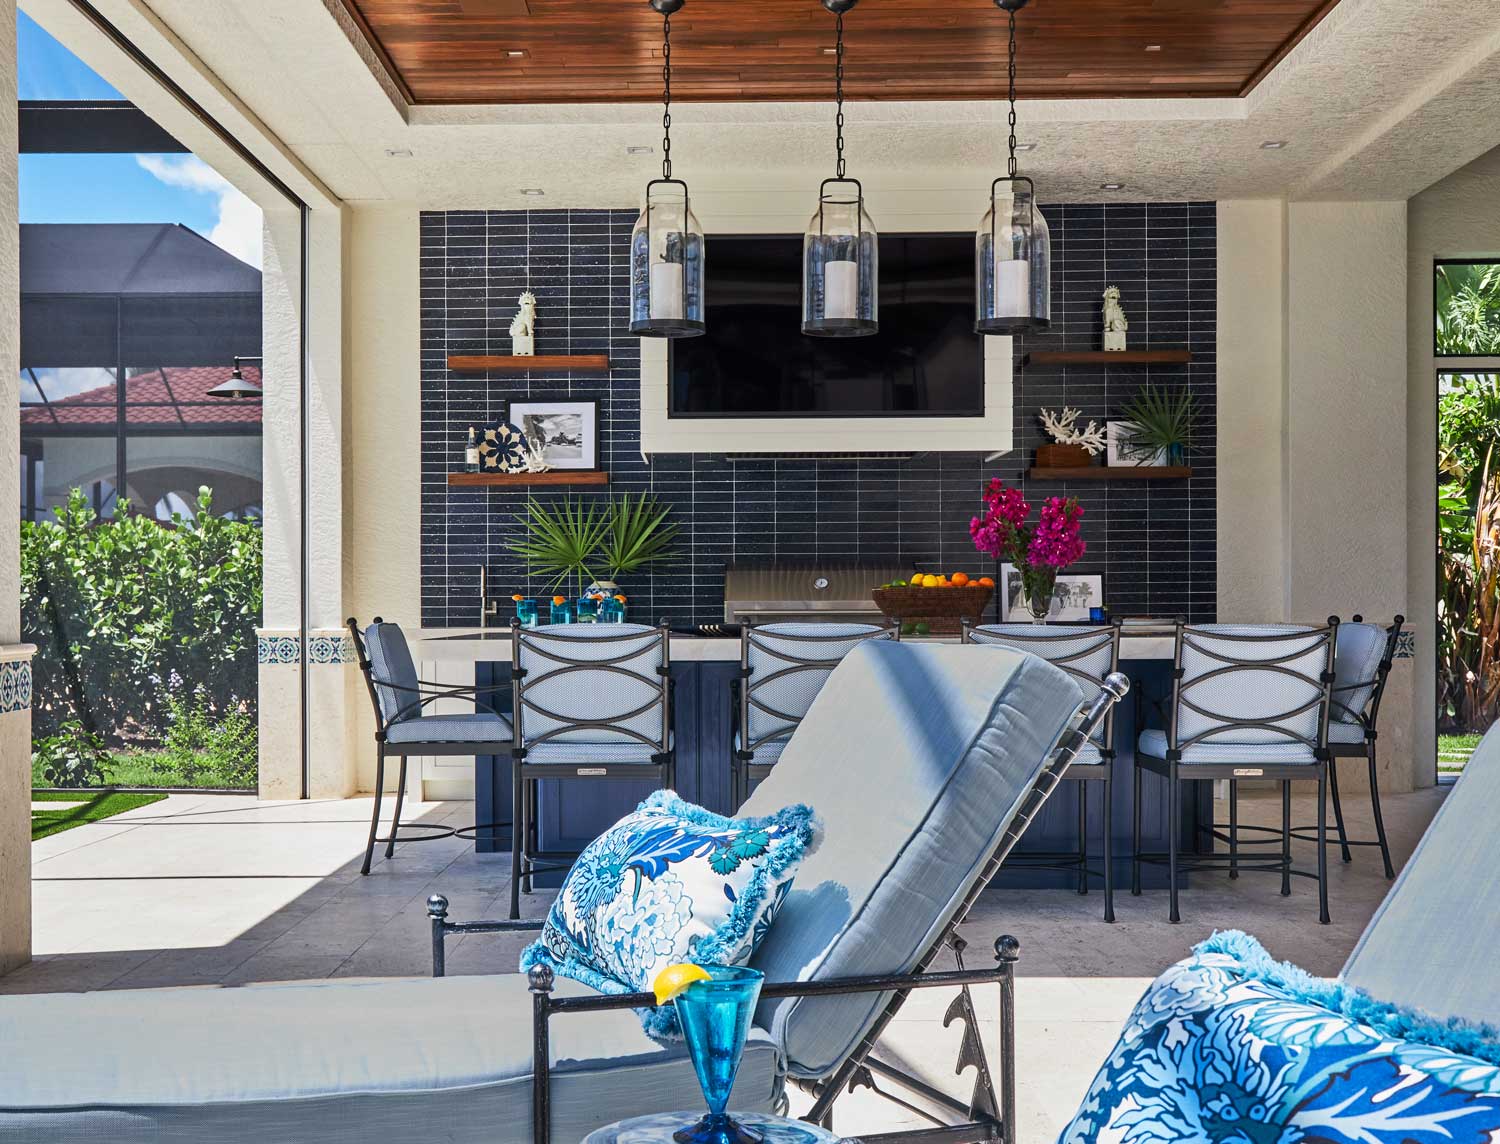 The outdoor living area of The Lykos Group’s “Audubon Outdoor Paradise” project, which received a Sand Dollar Award for Best Space Renovation ($250,001 - $400,000).